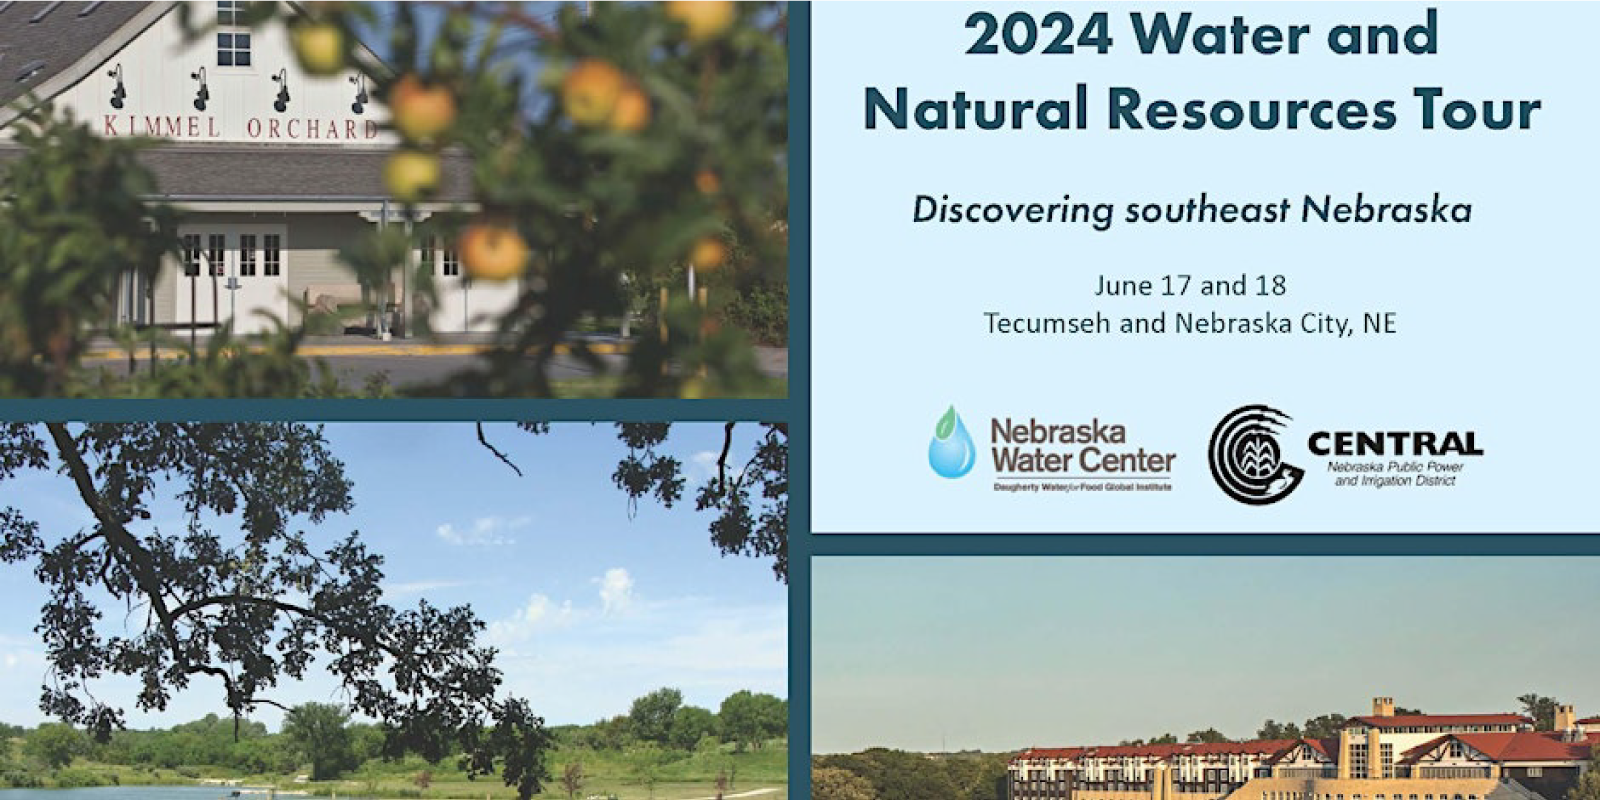 The 2024 Water and Natural Resources tour is hosted by the Nebraska Water Center and the Central Nebraska Public Power and Irrigation District.